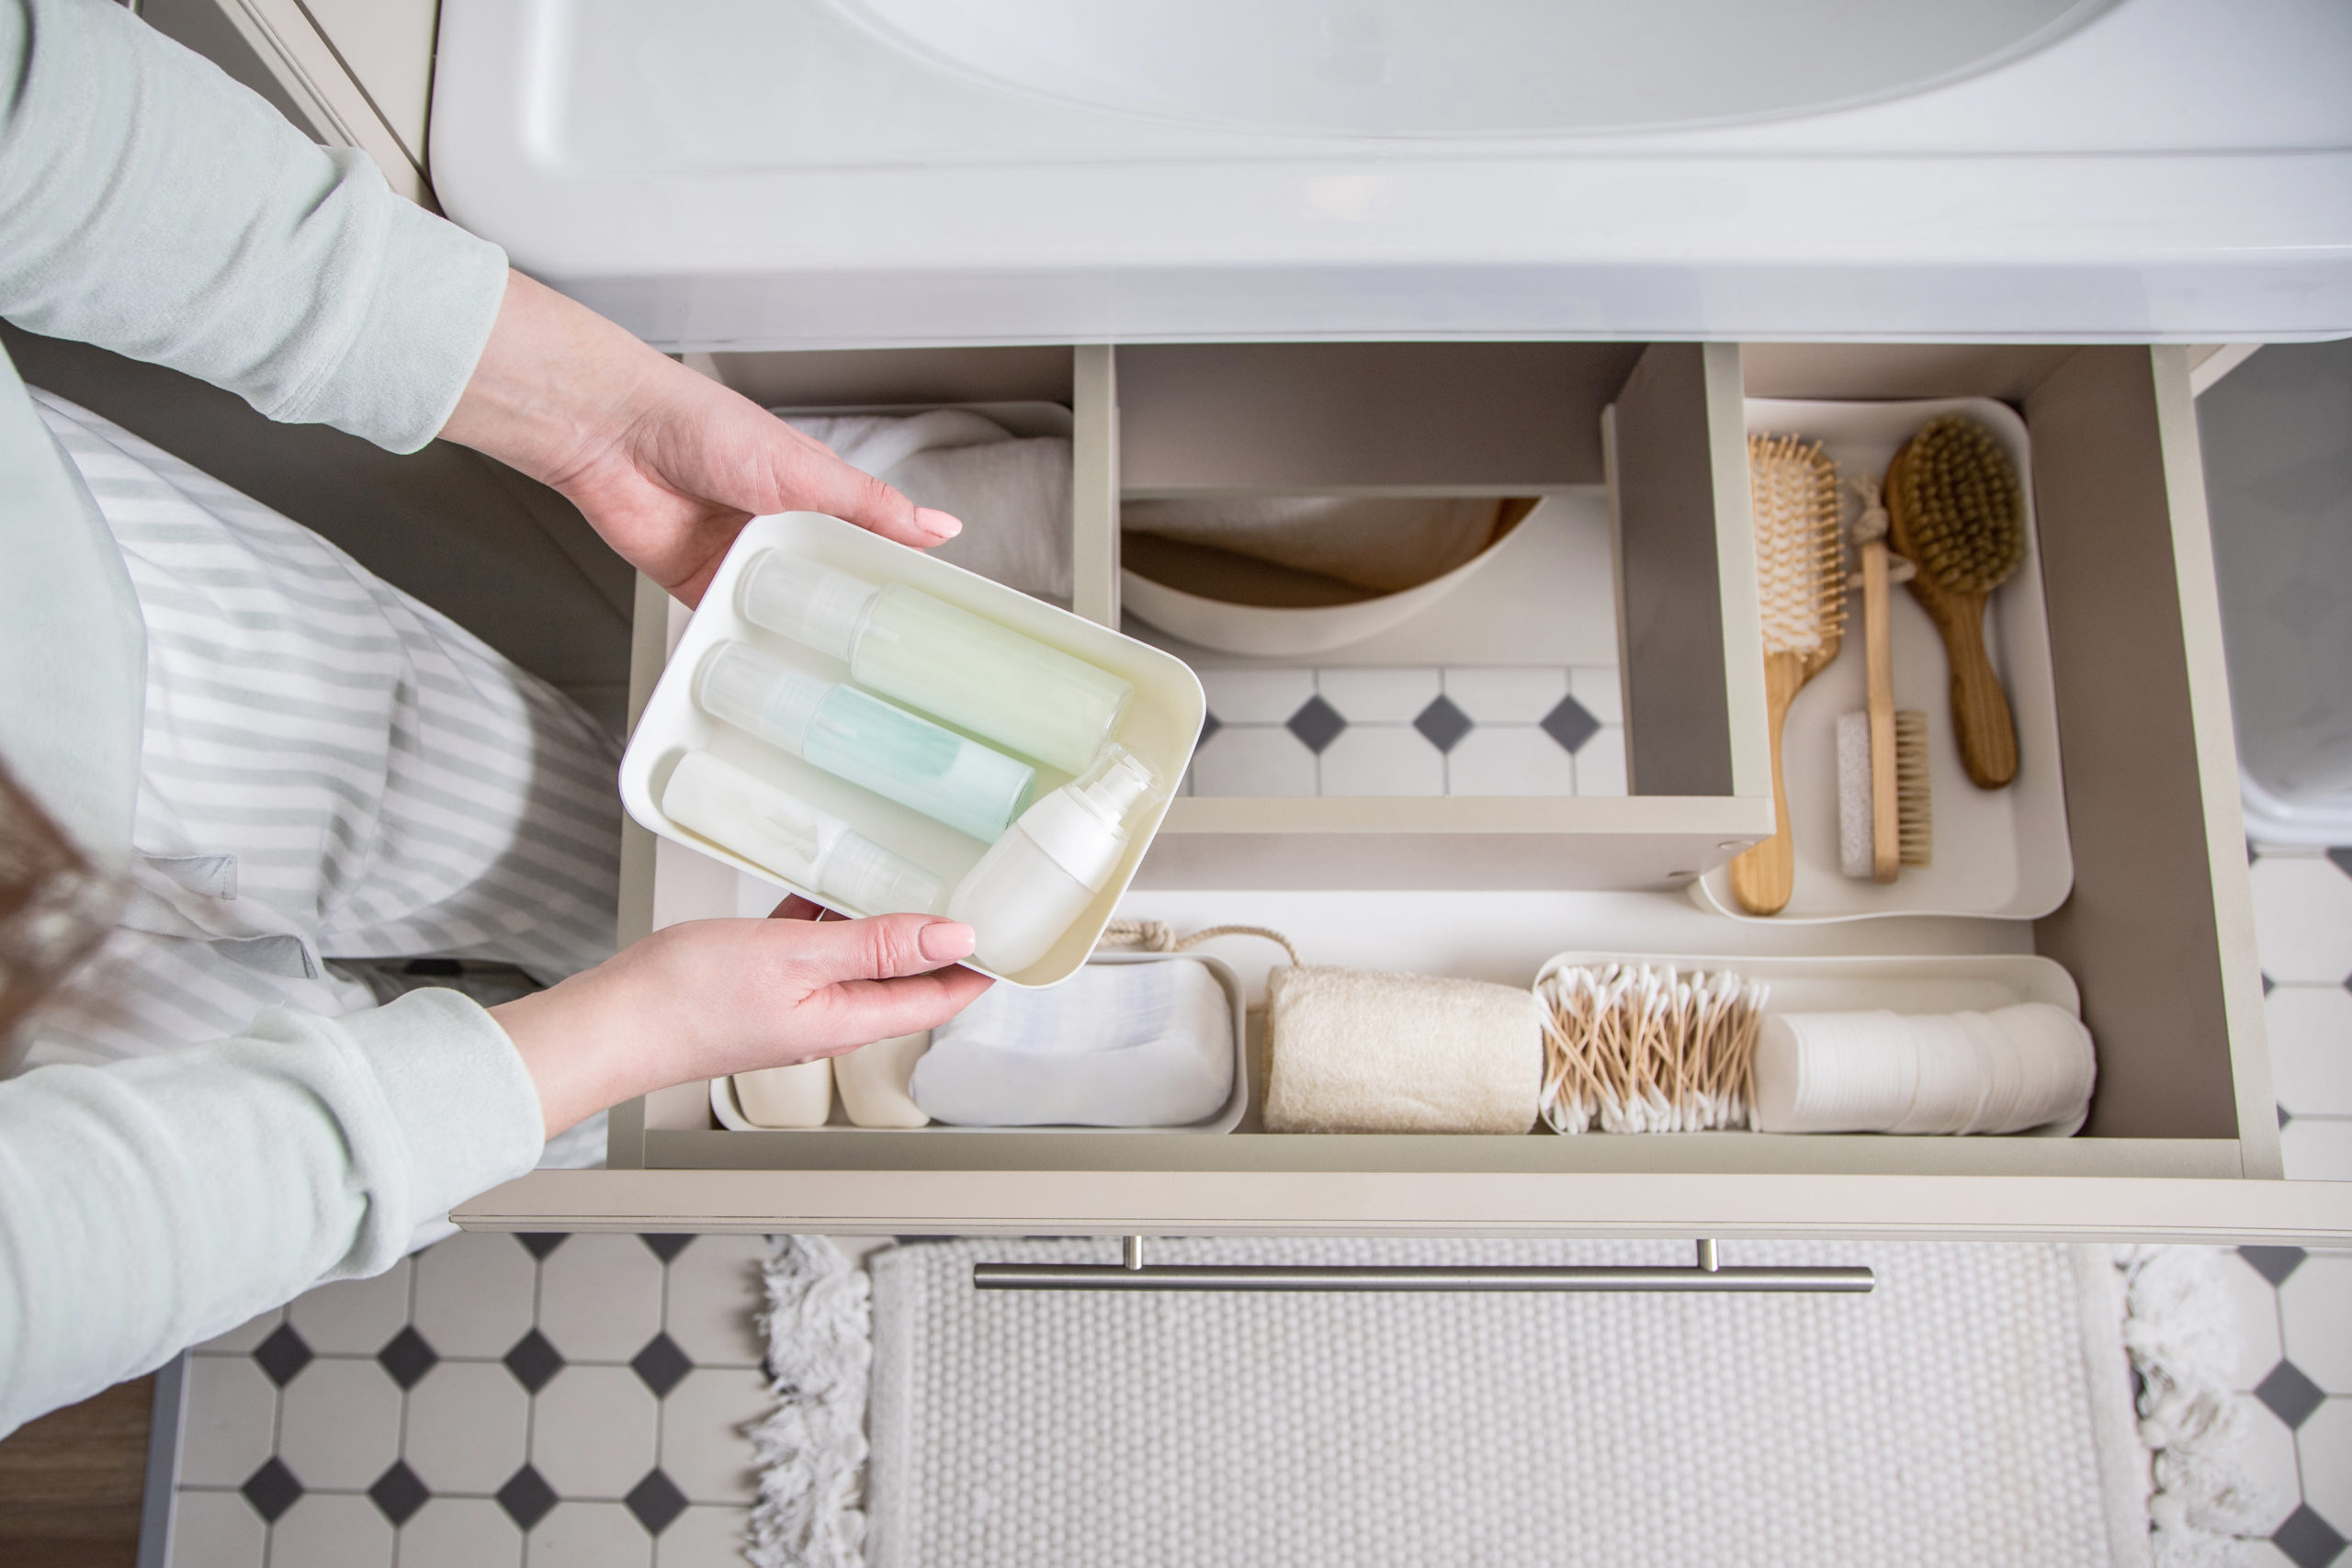 housewife-hands-putting-rolled-up-towel-into-drawer-sink-organizing-storage-space-bathroom-scaled